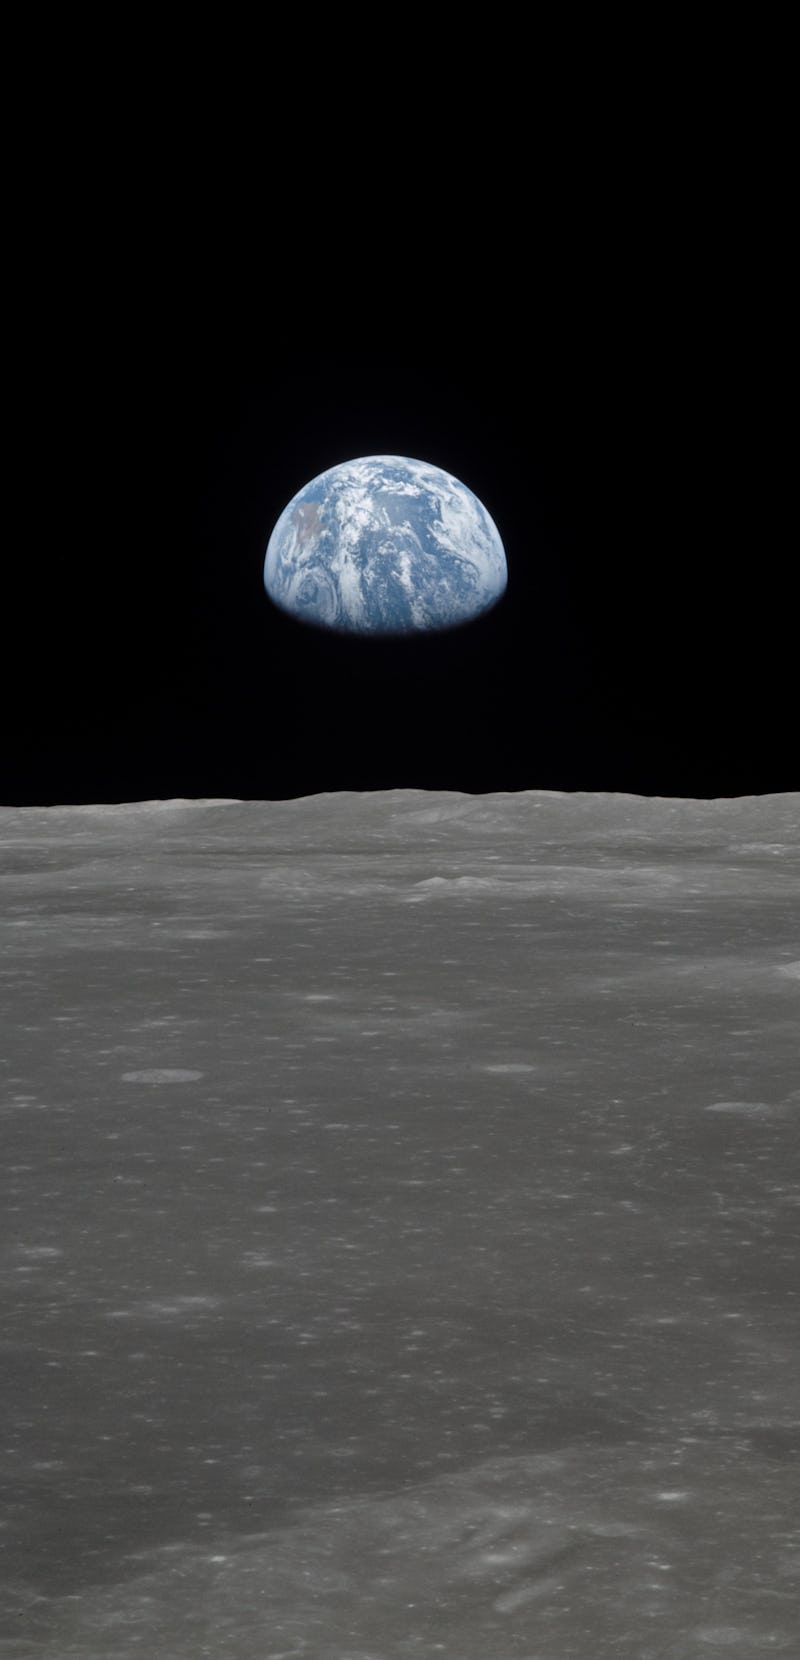 image of the Earth seen from the surface of the Moon